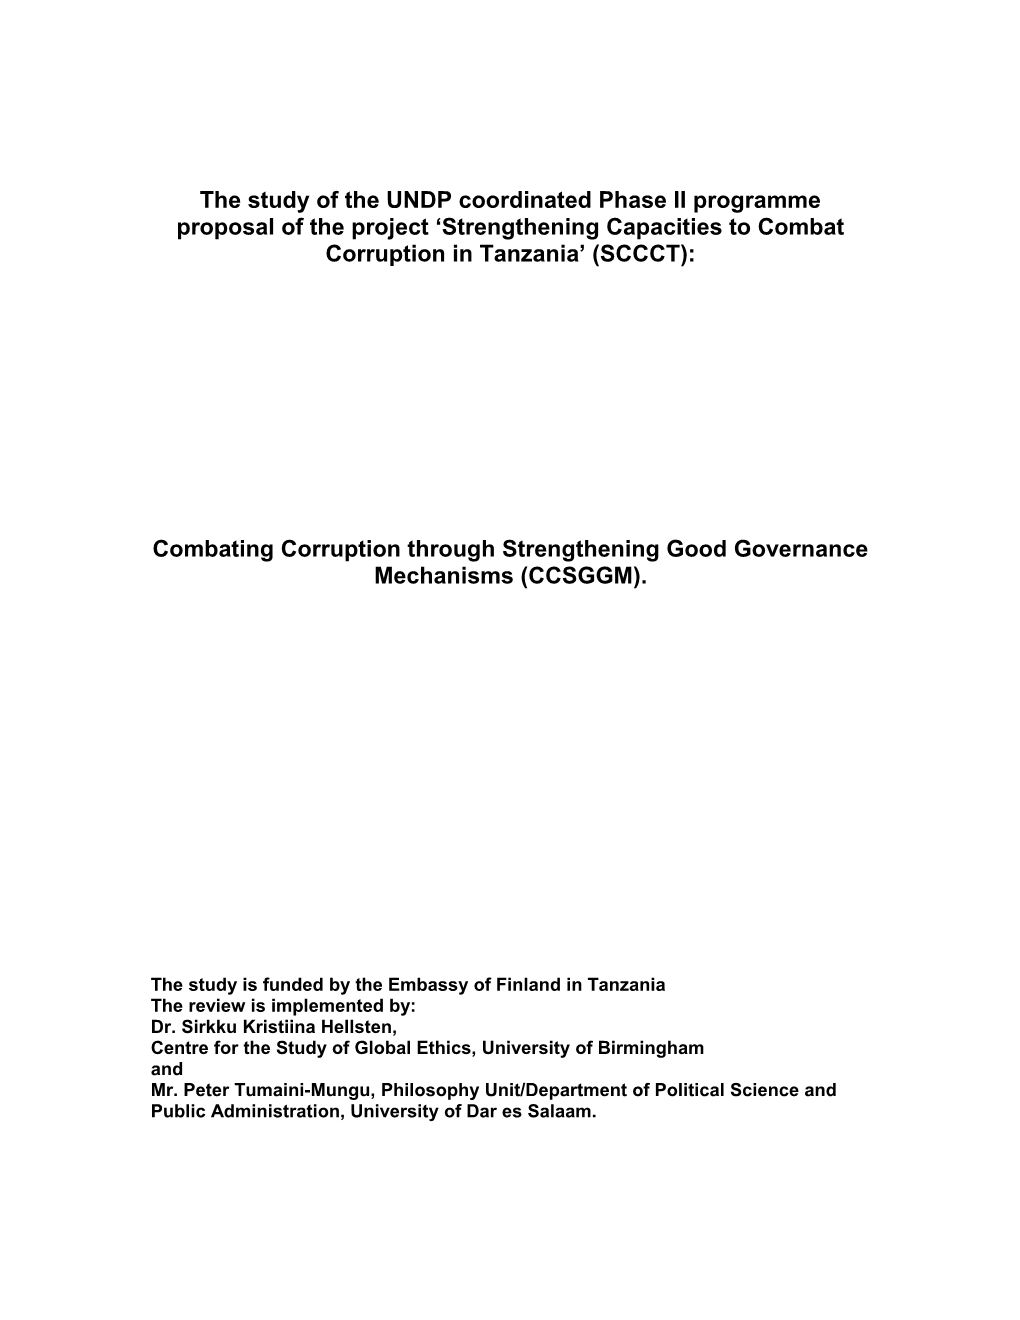 Appraisal of the UNDP Coordinated Phase II Programme Proposal of the Project Strengthening